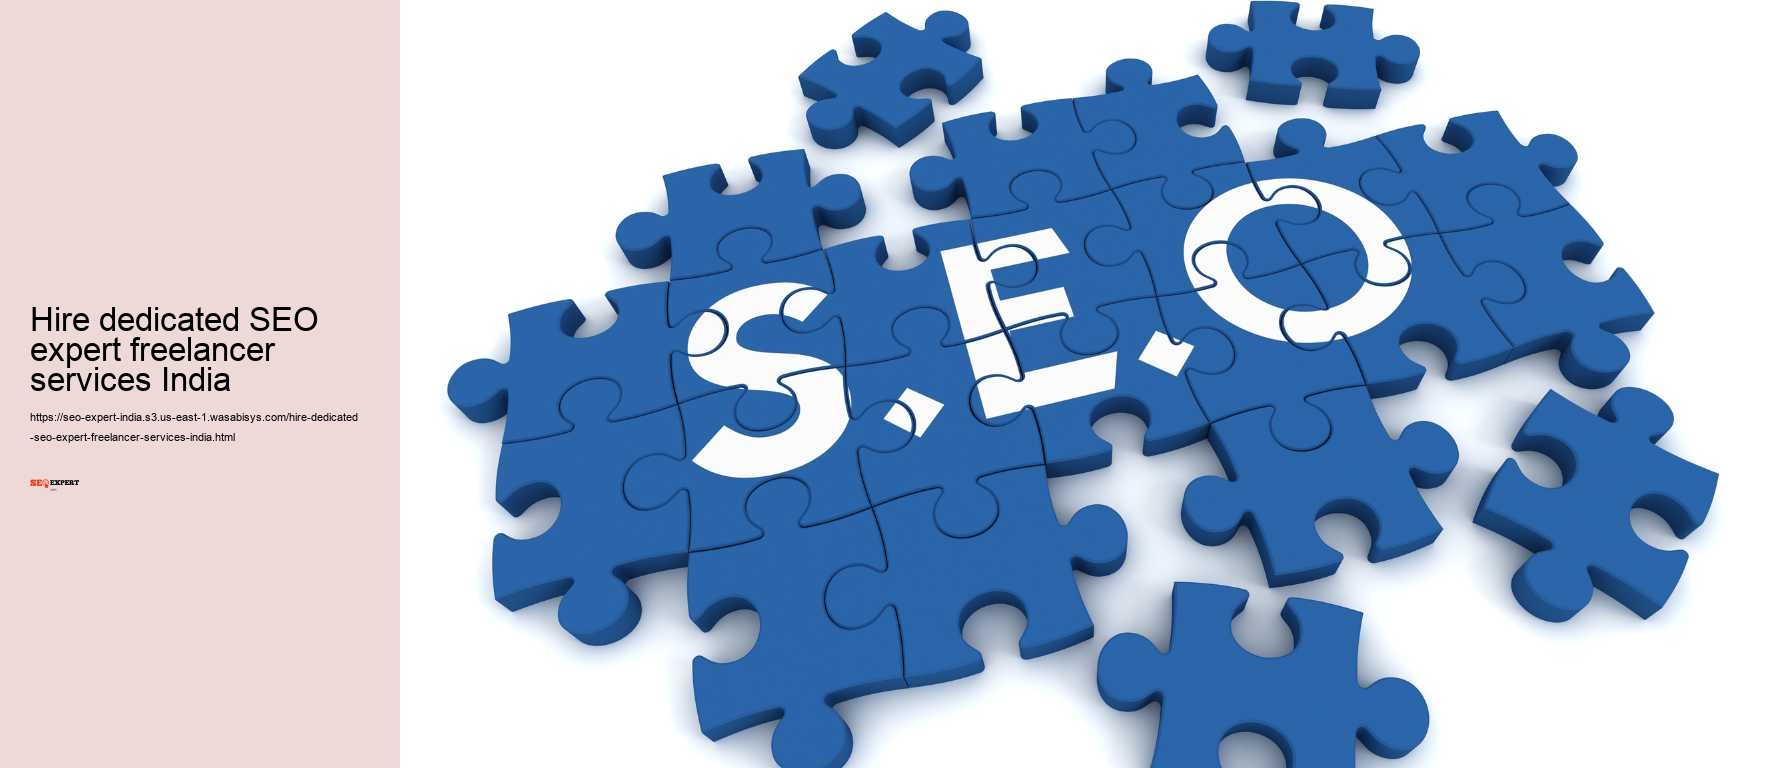 Hire dedicated SEO expert freelancer services India